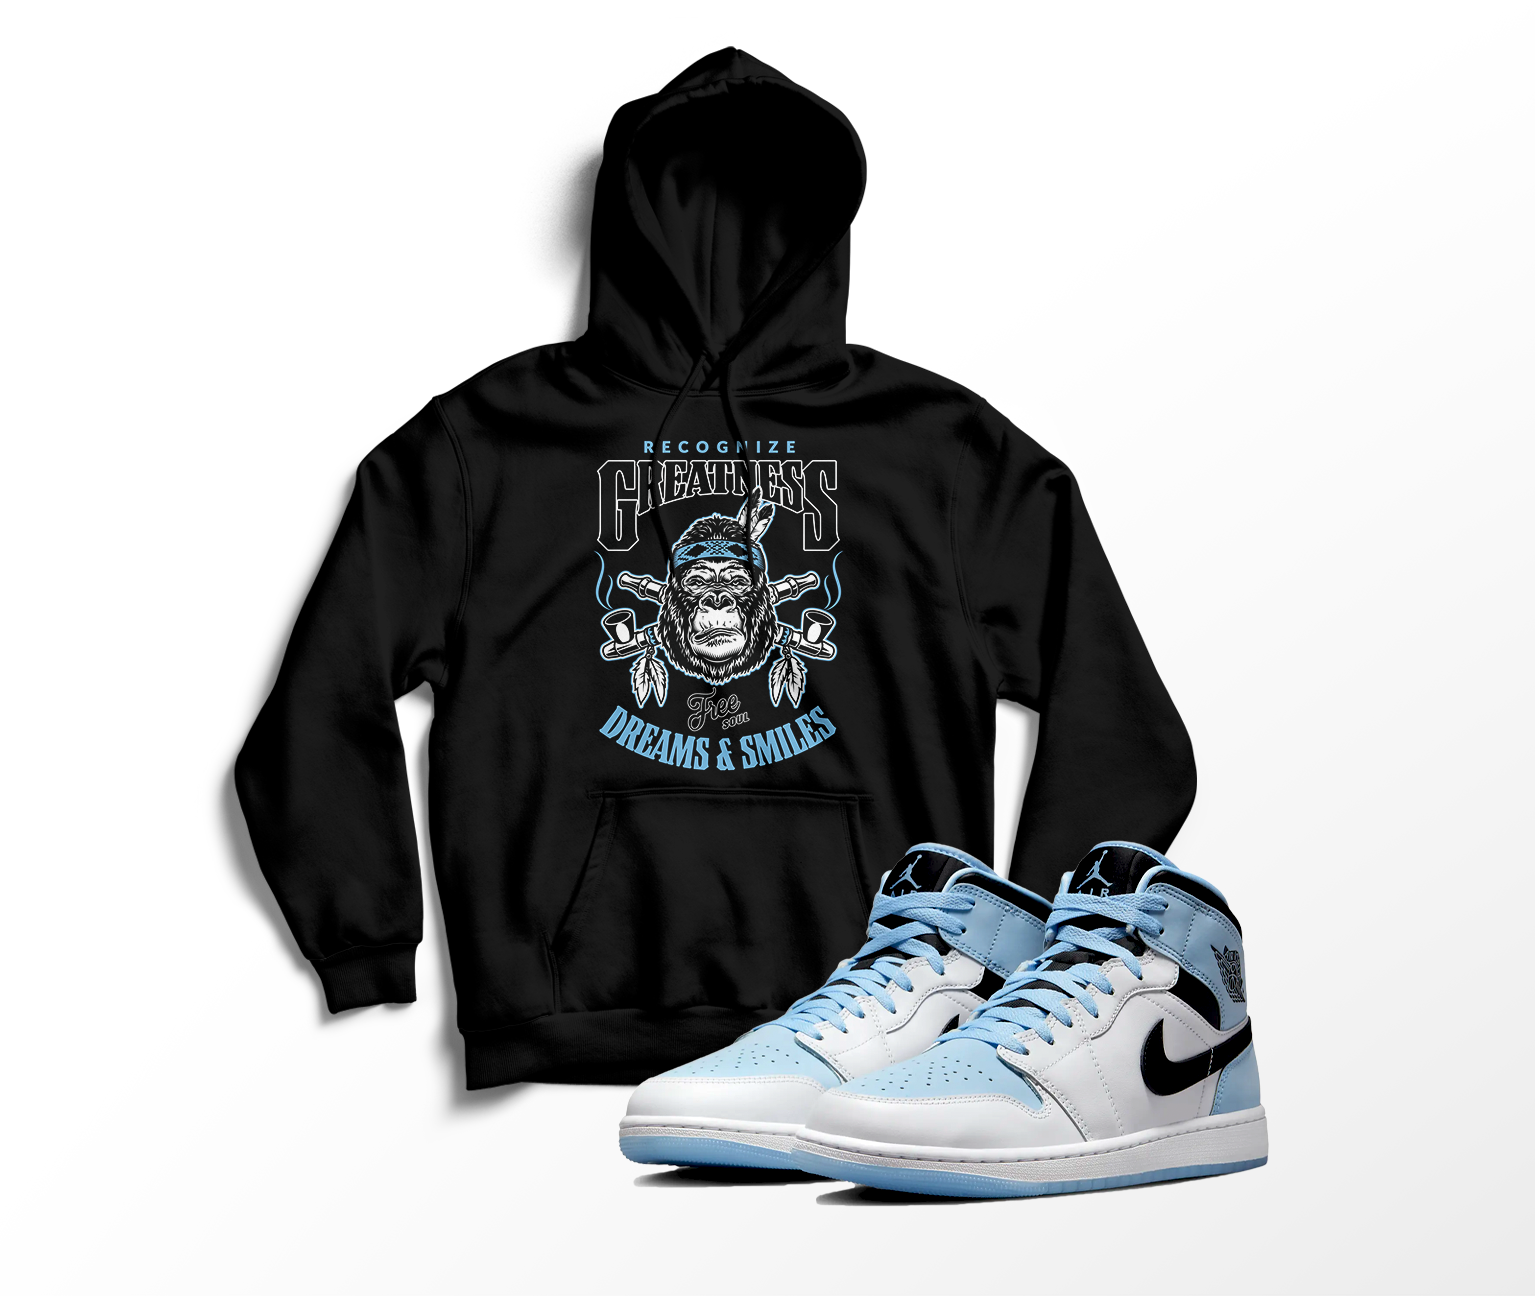 'Recognize Greatness' Custom Graphic Hoodie To Match Air Jordan 1 White Ice